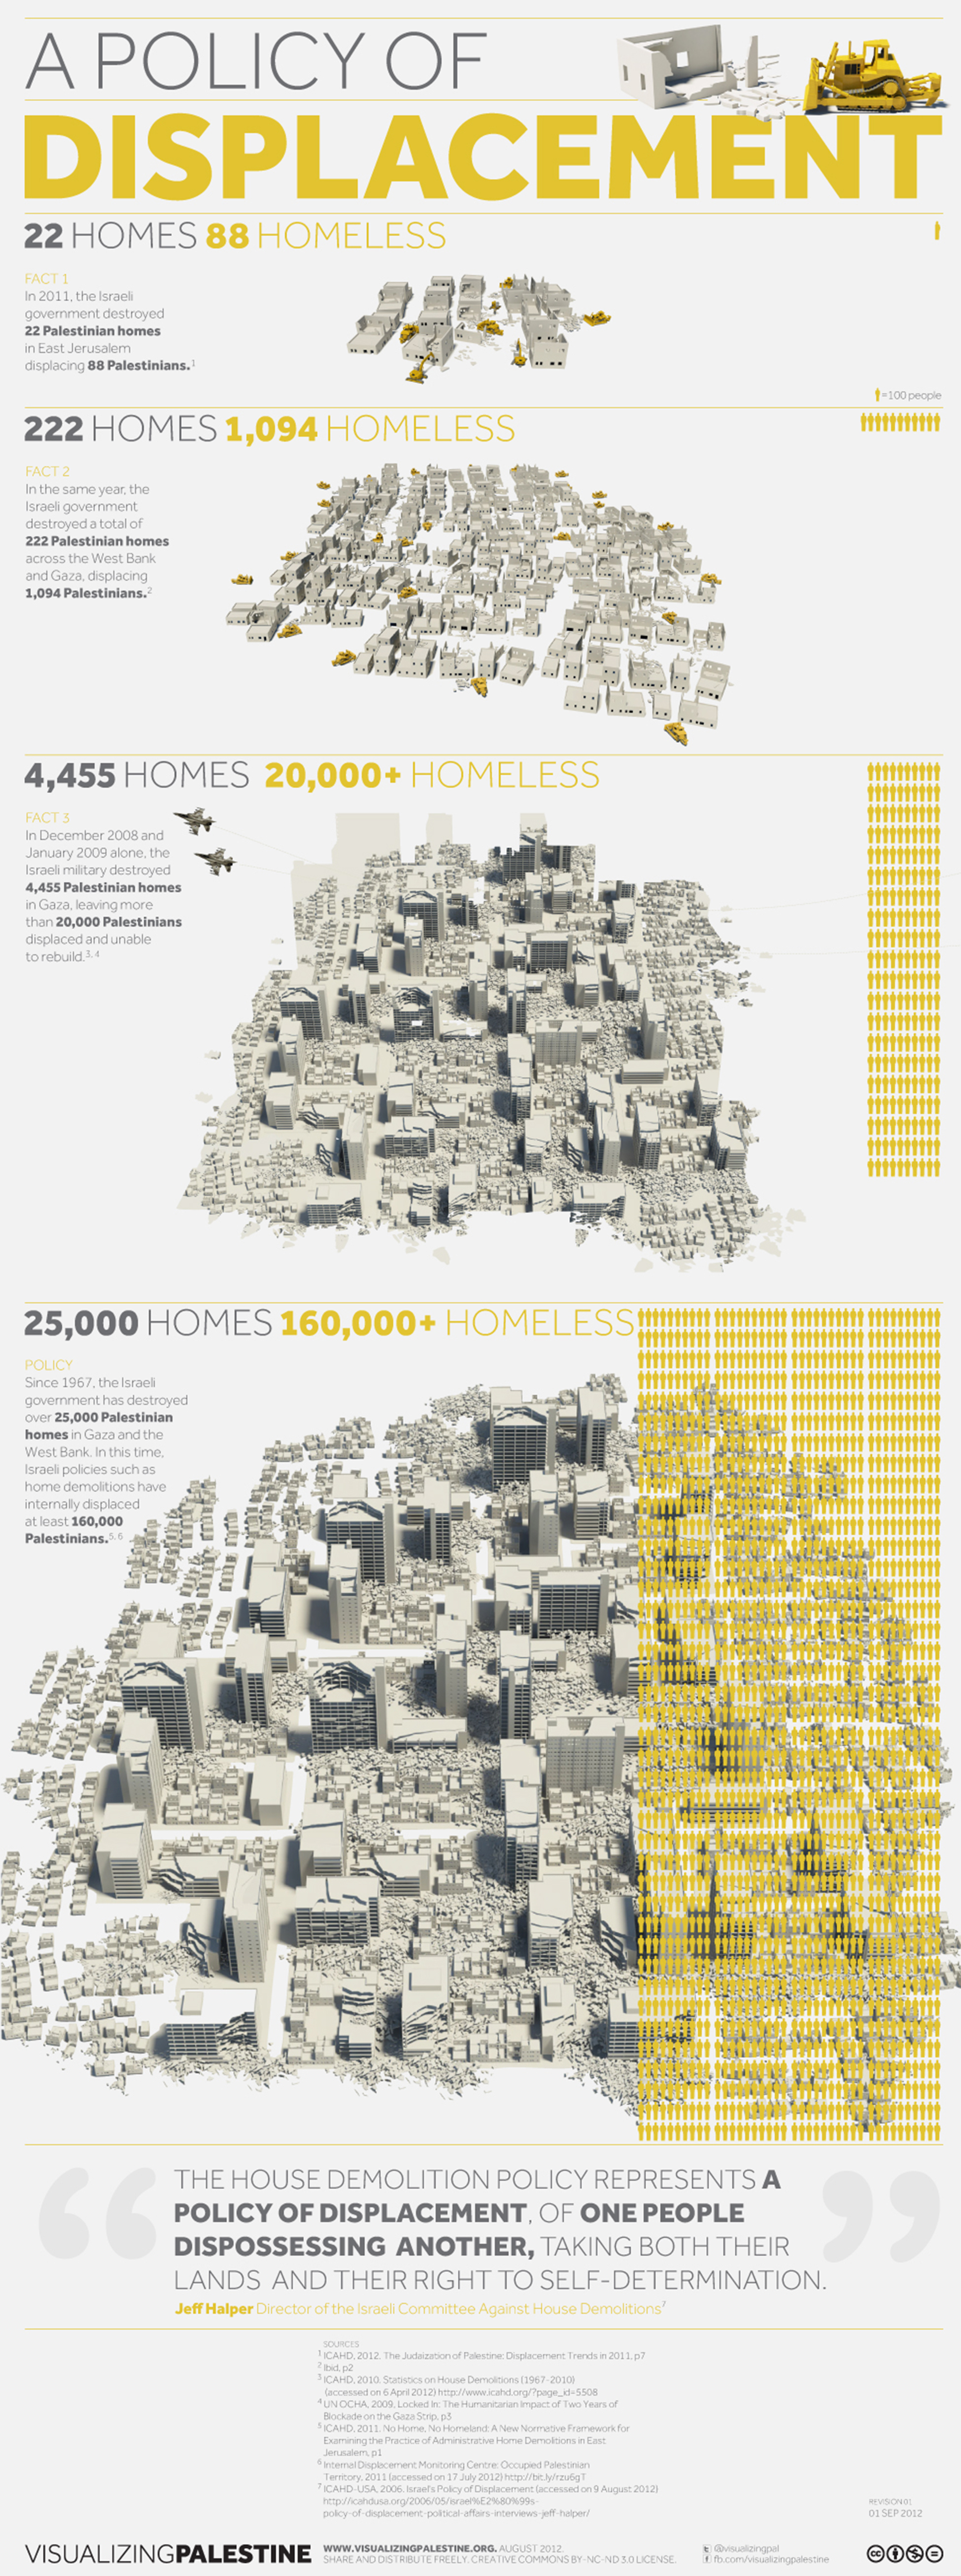 A long infographic on a white background, the title is A Policy of Displacement in grey and yellow, beside the title text is a cartoon-style 3D render of a bulldozer demolishing a house. The first tier, directly below the title is labelled 22 Homes, 88 Homeless. On the left is paragraph reads “Fact 1: In 2011 the Israeli government destroyed 22 Palestinian homes in East Jerusalem displacing 88 Palestinians”. This fact is illustrated with a small cluster of houses being demolished by diggers and bulldozers in the middle of the page, to the right is a small, single graphic of an almost complete person, a key explains that 1 complete person represents 100 displaced Palestinians. Underneath, a tier labelled 222 homes 1094 Homeless, the paragraph reads “Fact 2: In the same year, the Israeli government destroyed a total of 222 Palestinian homes across the West Bank and Gaza displacing 1094 Palestinians”. The illustration for this tier depicts 10 times as many homes and bulldozers as the first image above. On the far right, 11 graphic figures represent the over 1000 people displaced. The next tier down is labelled 4455 Homes 20,000+ Homeless. The left hand paragraph reads “Fact 3; In December 2008 and January 2009 alone, the Israeli military destroyed 4455 Palestinian homes in Gaza, leaving more than 20,000 Palestinians displaced and unable to rebuild”. The illustration depicts a broad area of demolition, including houses, apartment buildings and amenities seen from the air, fighter jets fly above the debris. To the right, a large block of graphic people measuring twenty lines down visualises the numbers affected. The below tier titled 25000 Homes and 160,000 Homeless is cluttered with the text, illustrations and graphic figures. The text reads ‘Policy: Since 1967 the Israeli government has destroyed over 35,000 Palestinian homes in Gaza and the West Bank. In this time, Israeli policies such as home demolitions have internally displaced at least 160,000 Palestinians”. The illustration shows a vast area of destruction, with buildings reduced to grey rubble across the width of the image. The small graphic representing 100 displaced Palestinians is reproduced so many times, the tiny figures make a block of colour that takes up nearly the entire right hand side of the tier and overlay with the illustration. Below this, a quote is included by Jeff Halper, Director of the Israeli Committee Against House Demolitions, it reads “The house demolition policy represents a policy of displacement, of one people dispossessing another,  taking both their lands and their right to self-determination. A list of sources are available via www.visualizingpalestine.org